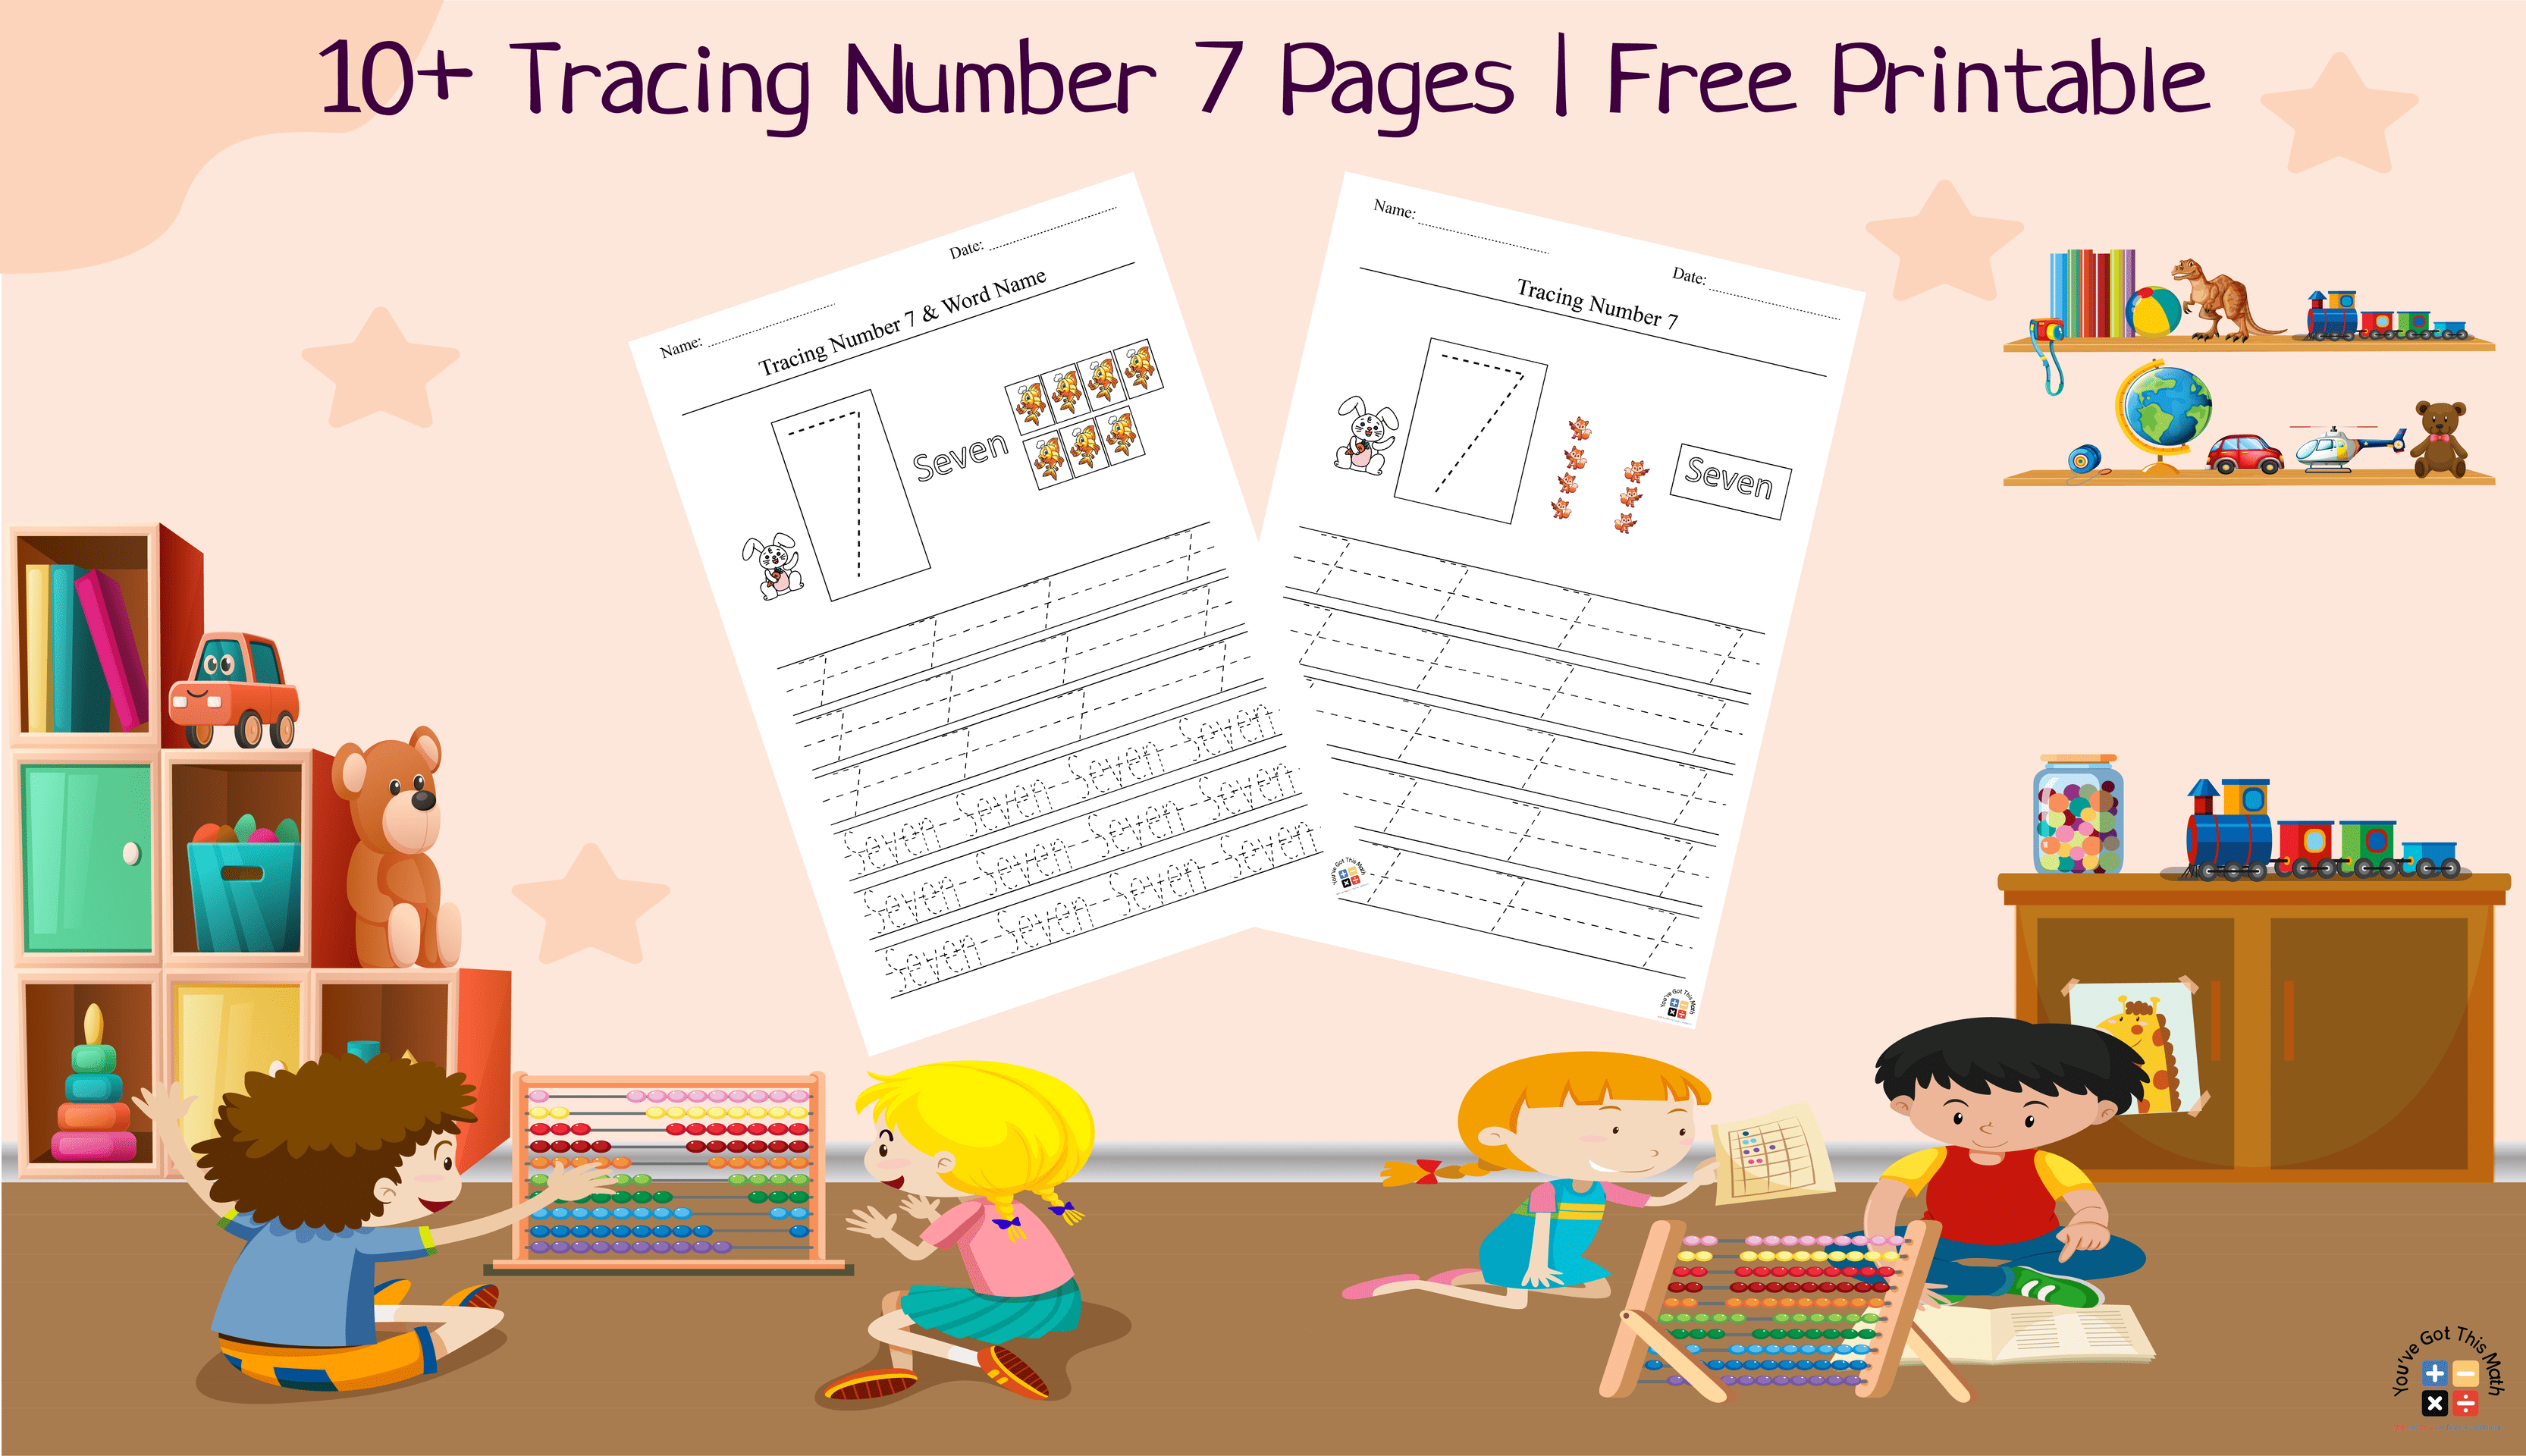 10+ Tracing Number 7 Pages | Free Printable